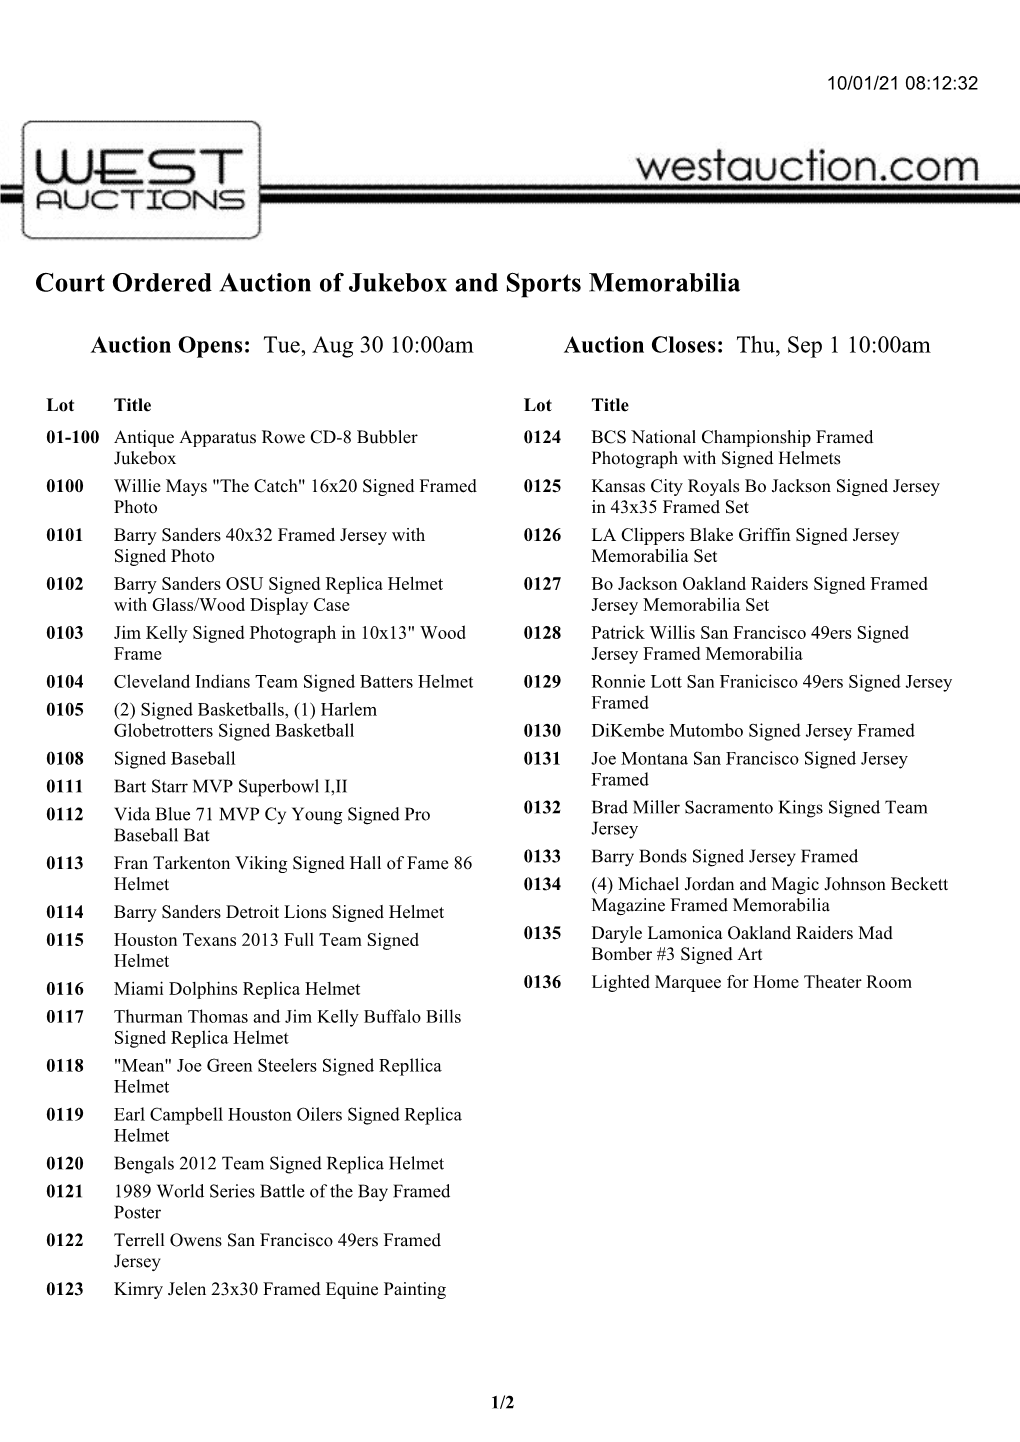 Court Ordered Auction of Jukebox and Sports Memorabilia